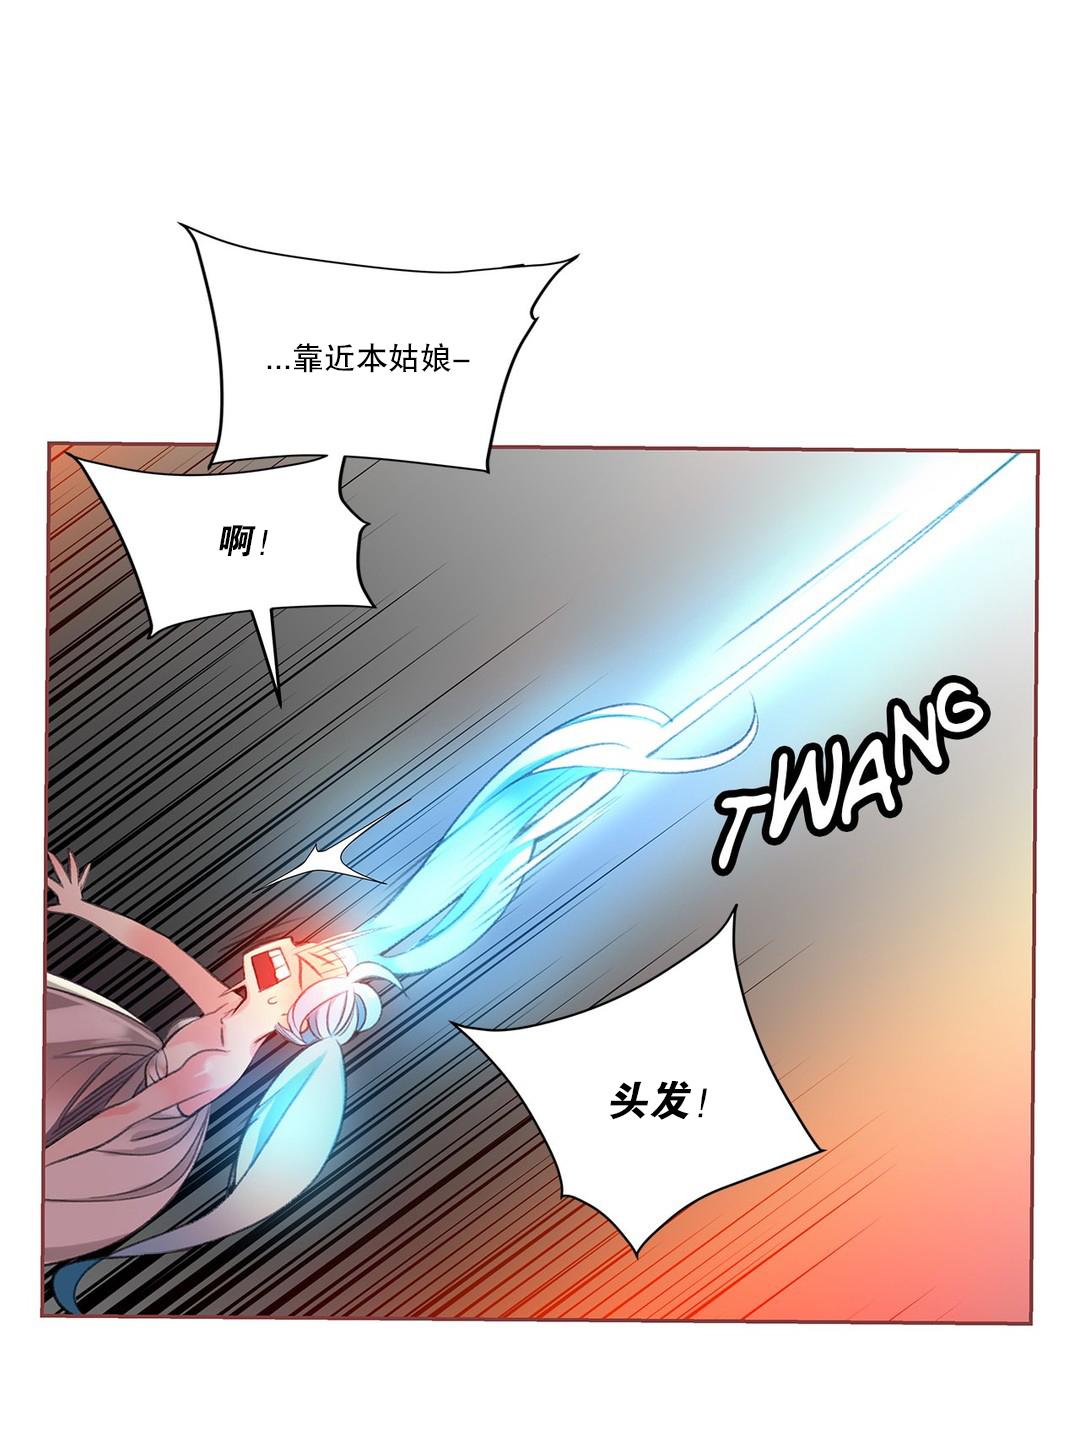 [Juder] Lilith`s Cord (第二季) Ch.61-67 [Chinese] [aaatwist个人汉化] [Ongoing] 9